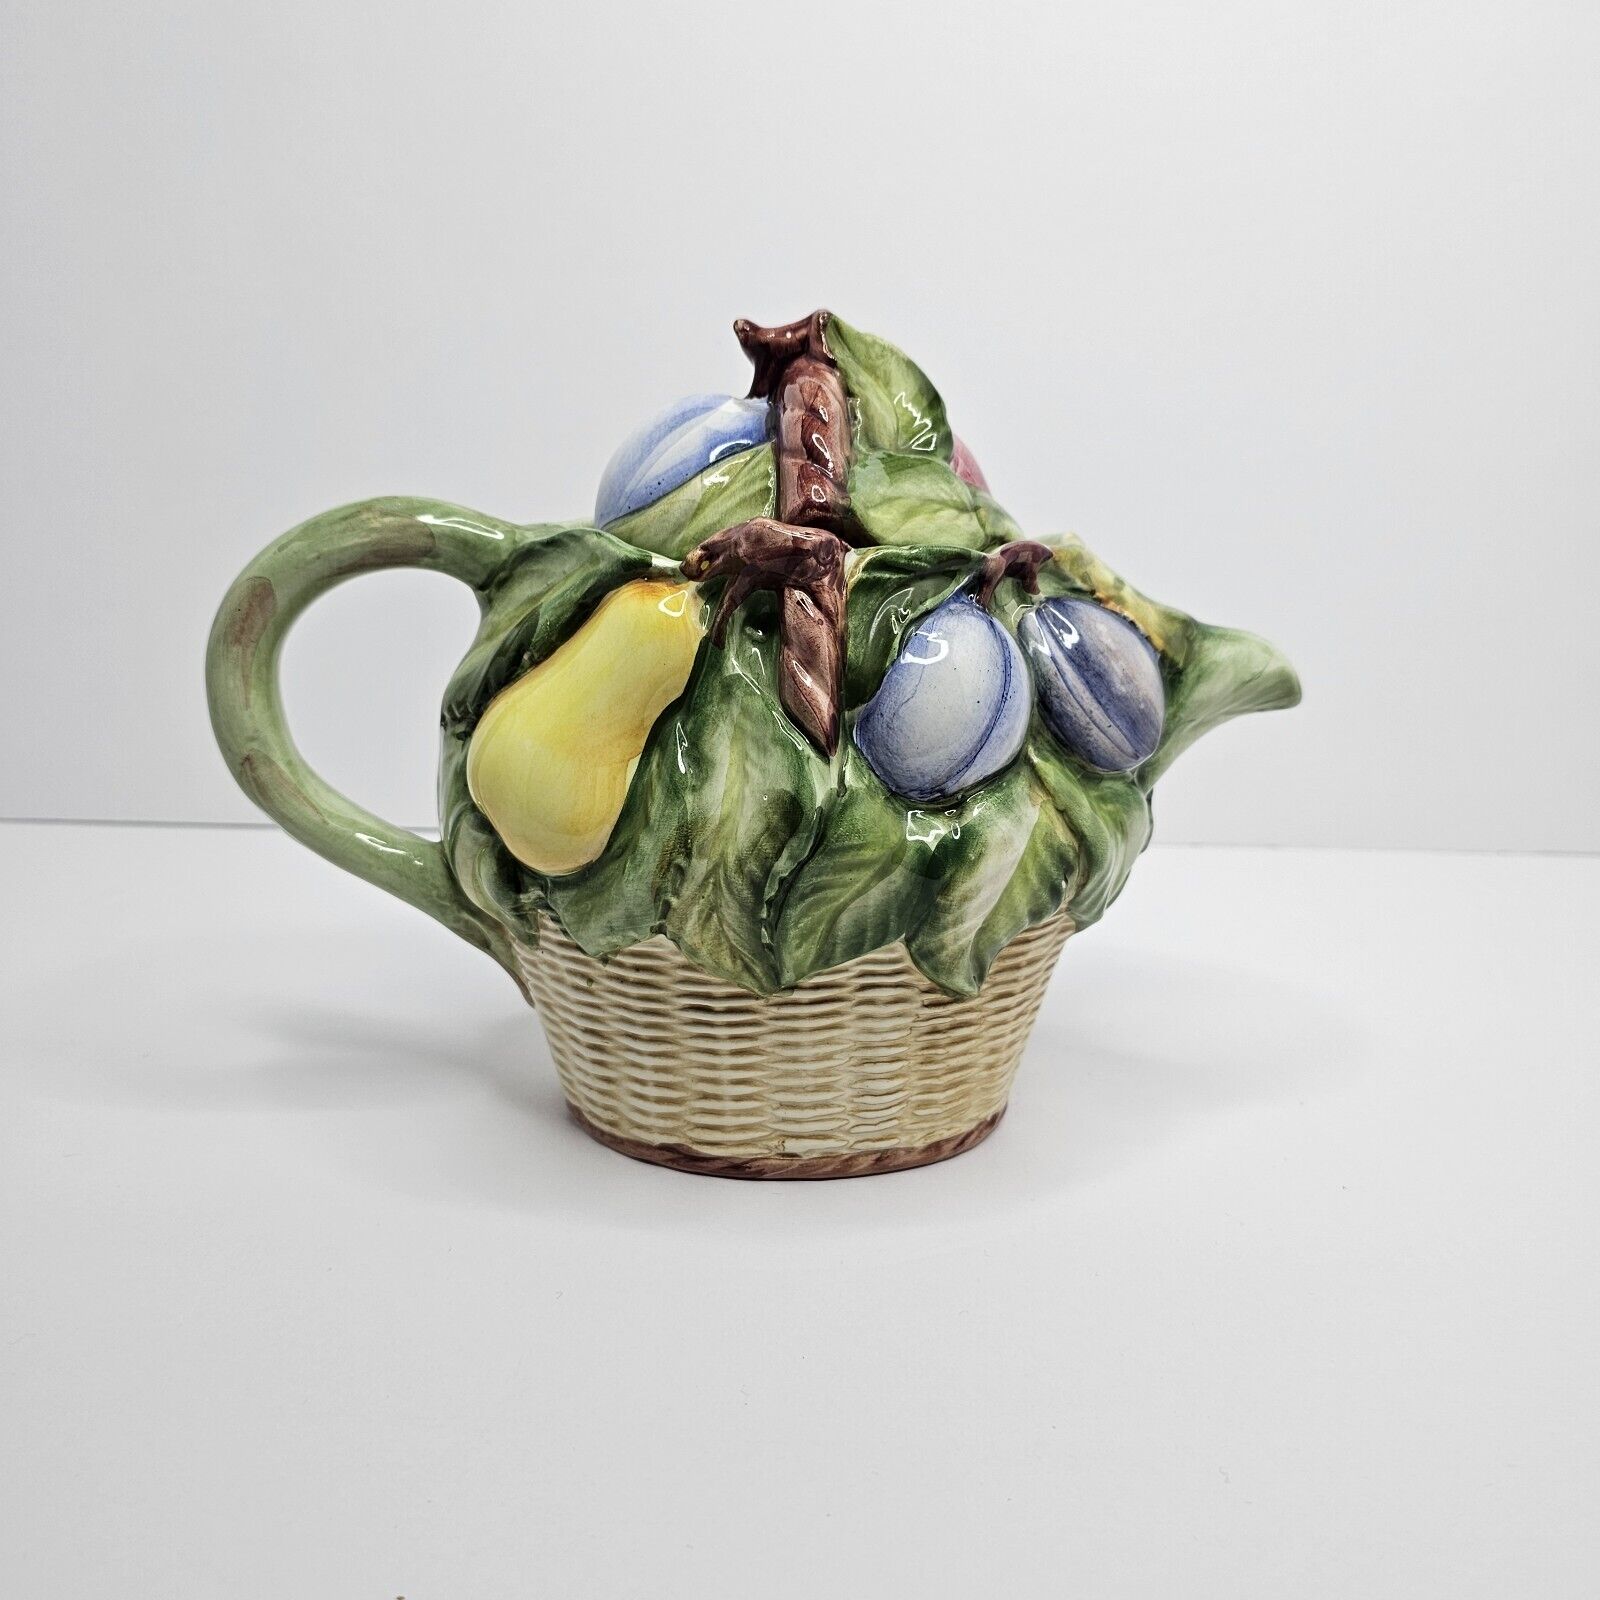 Fruit Basket Teapot From Italy Great Addition To Your CottageCore Kitchen